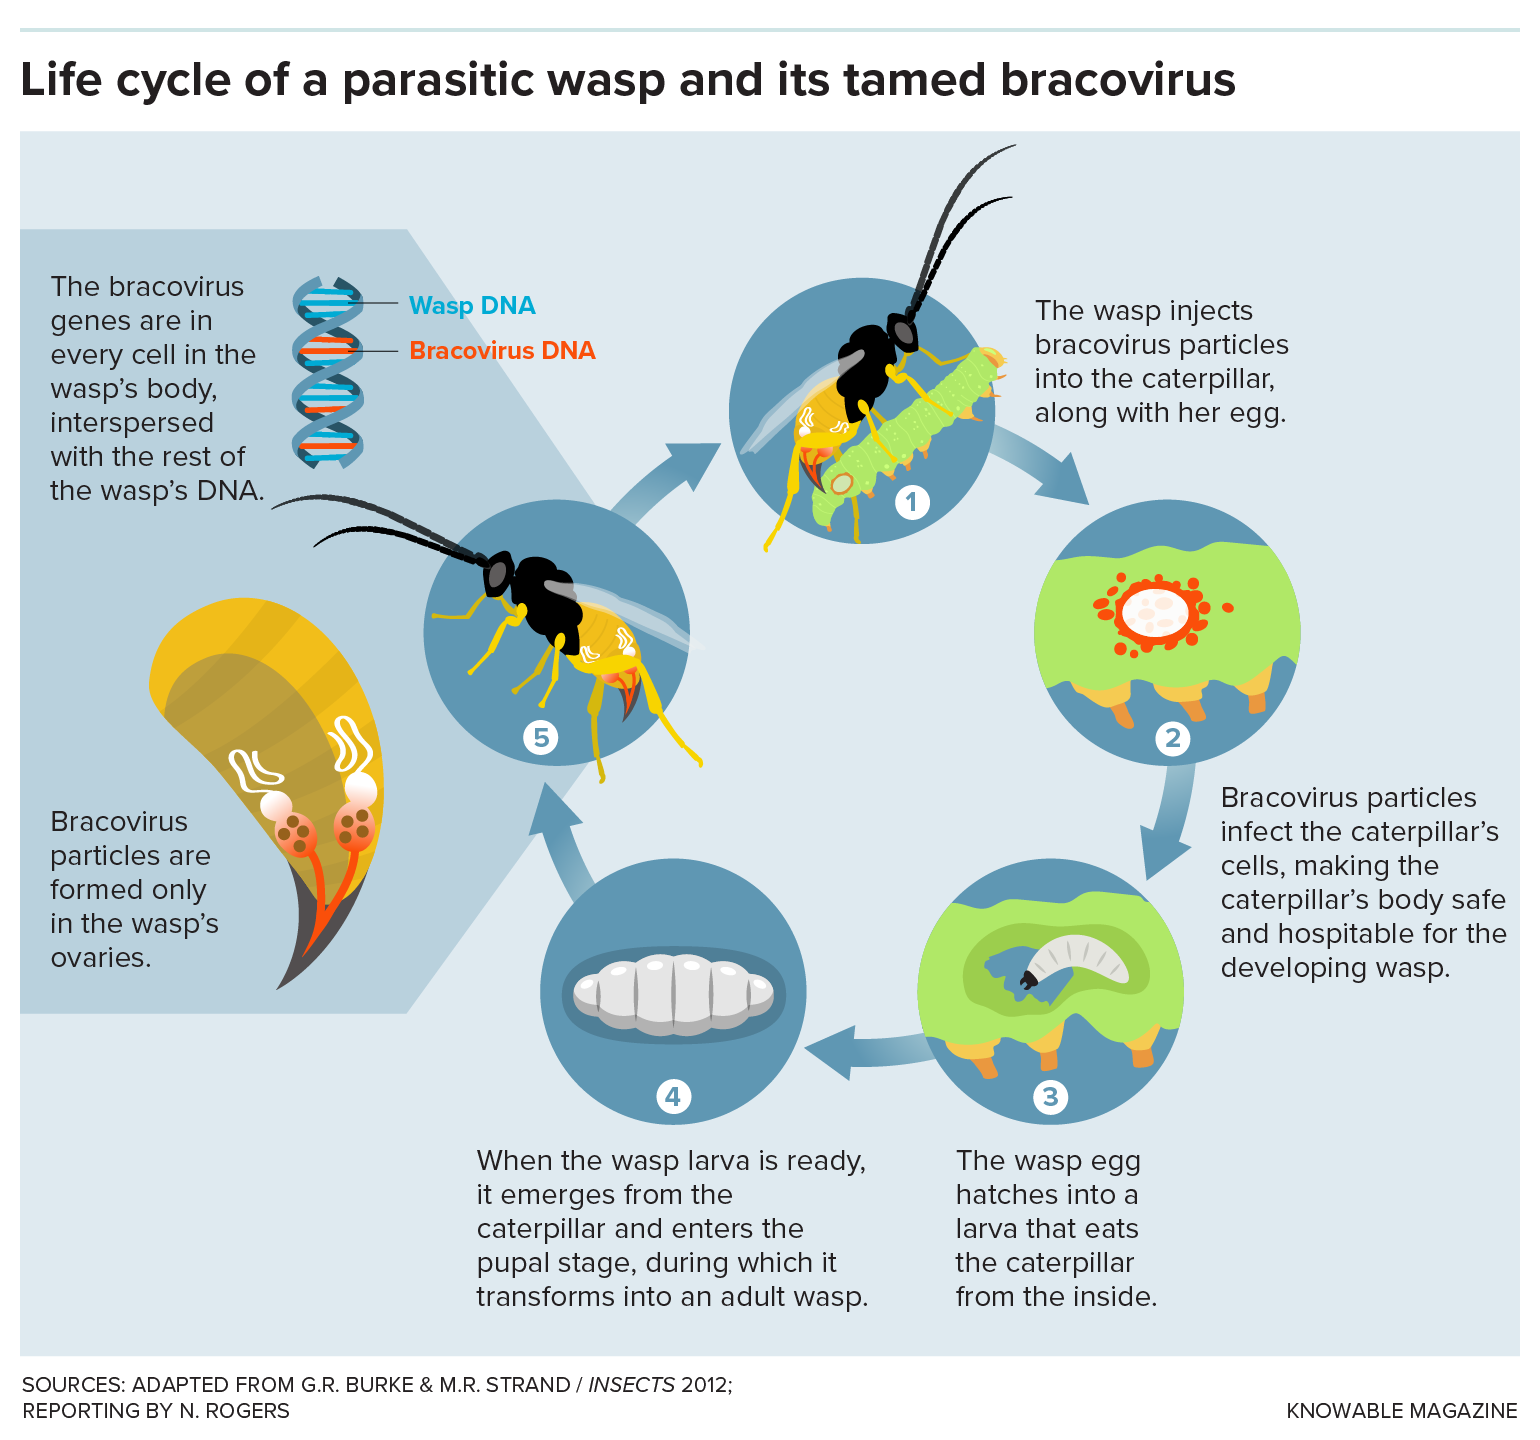 Graphic shows the key steps in the life cycle of a parasitic wasp that harbors a tamed bracovirus.